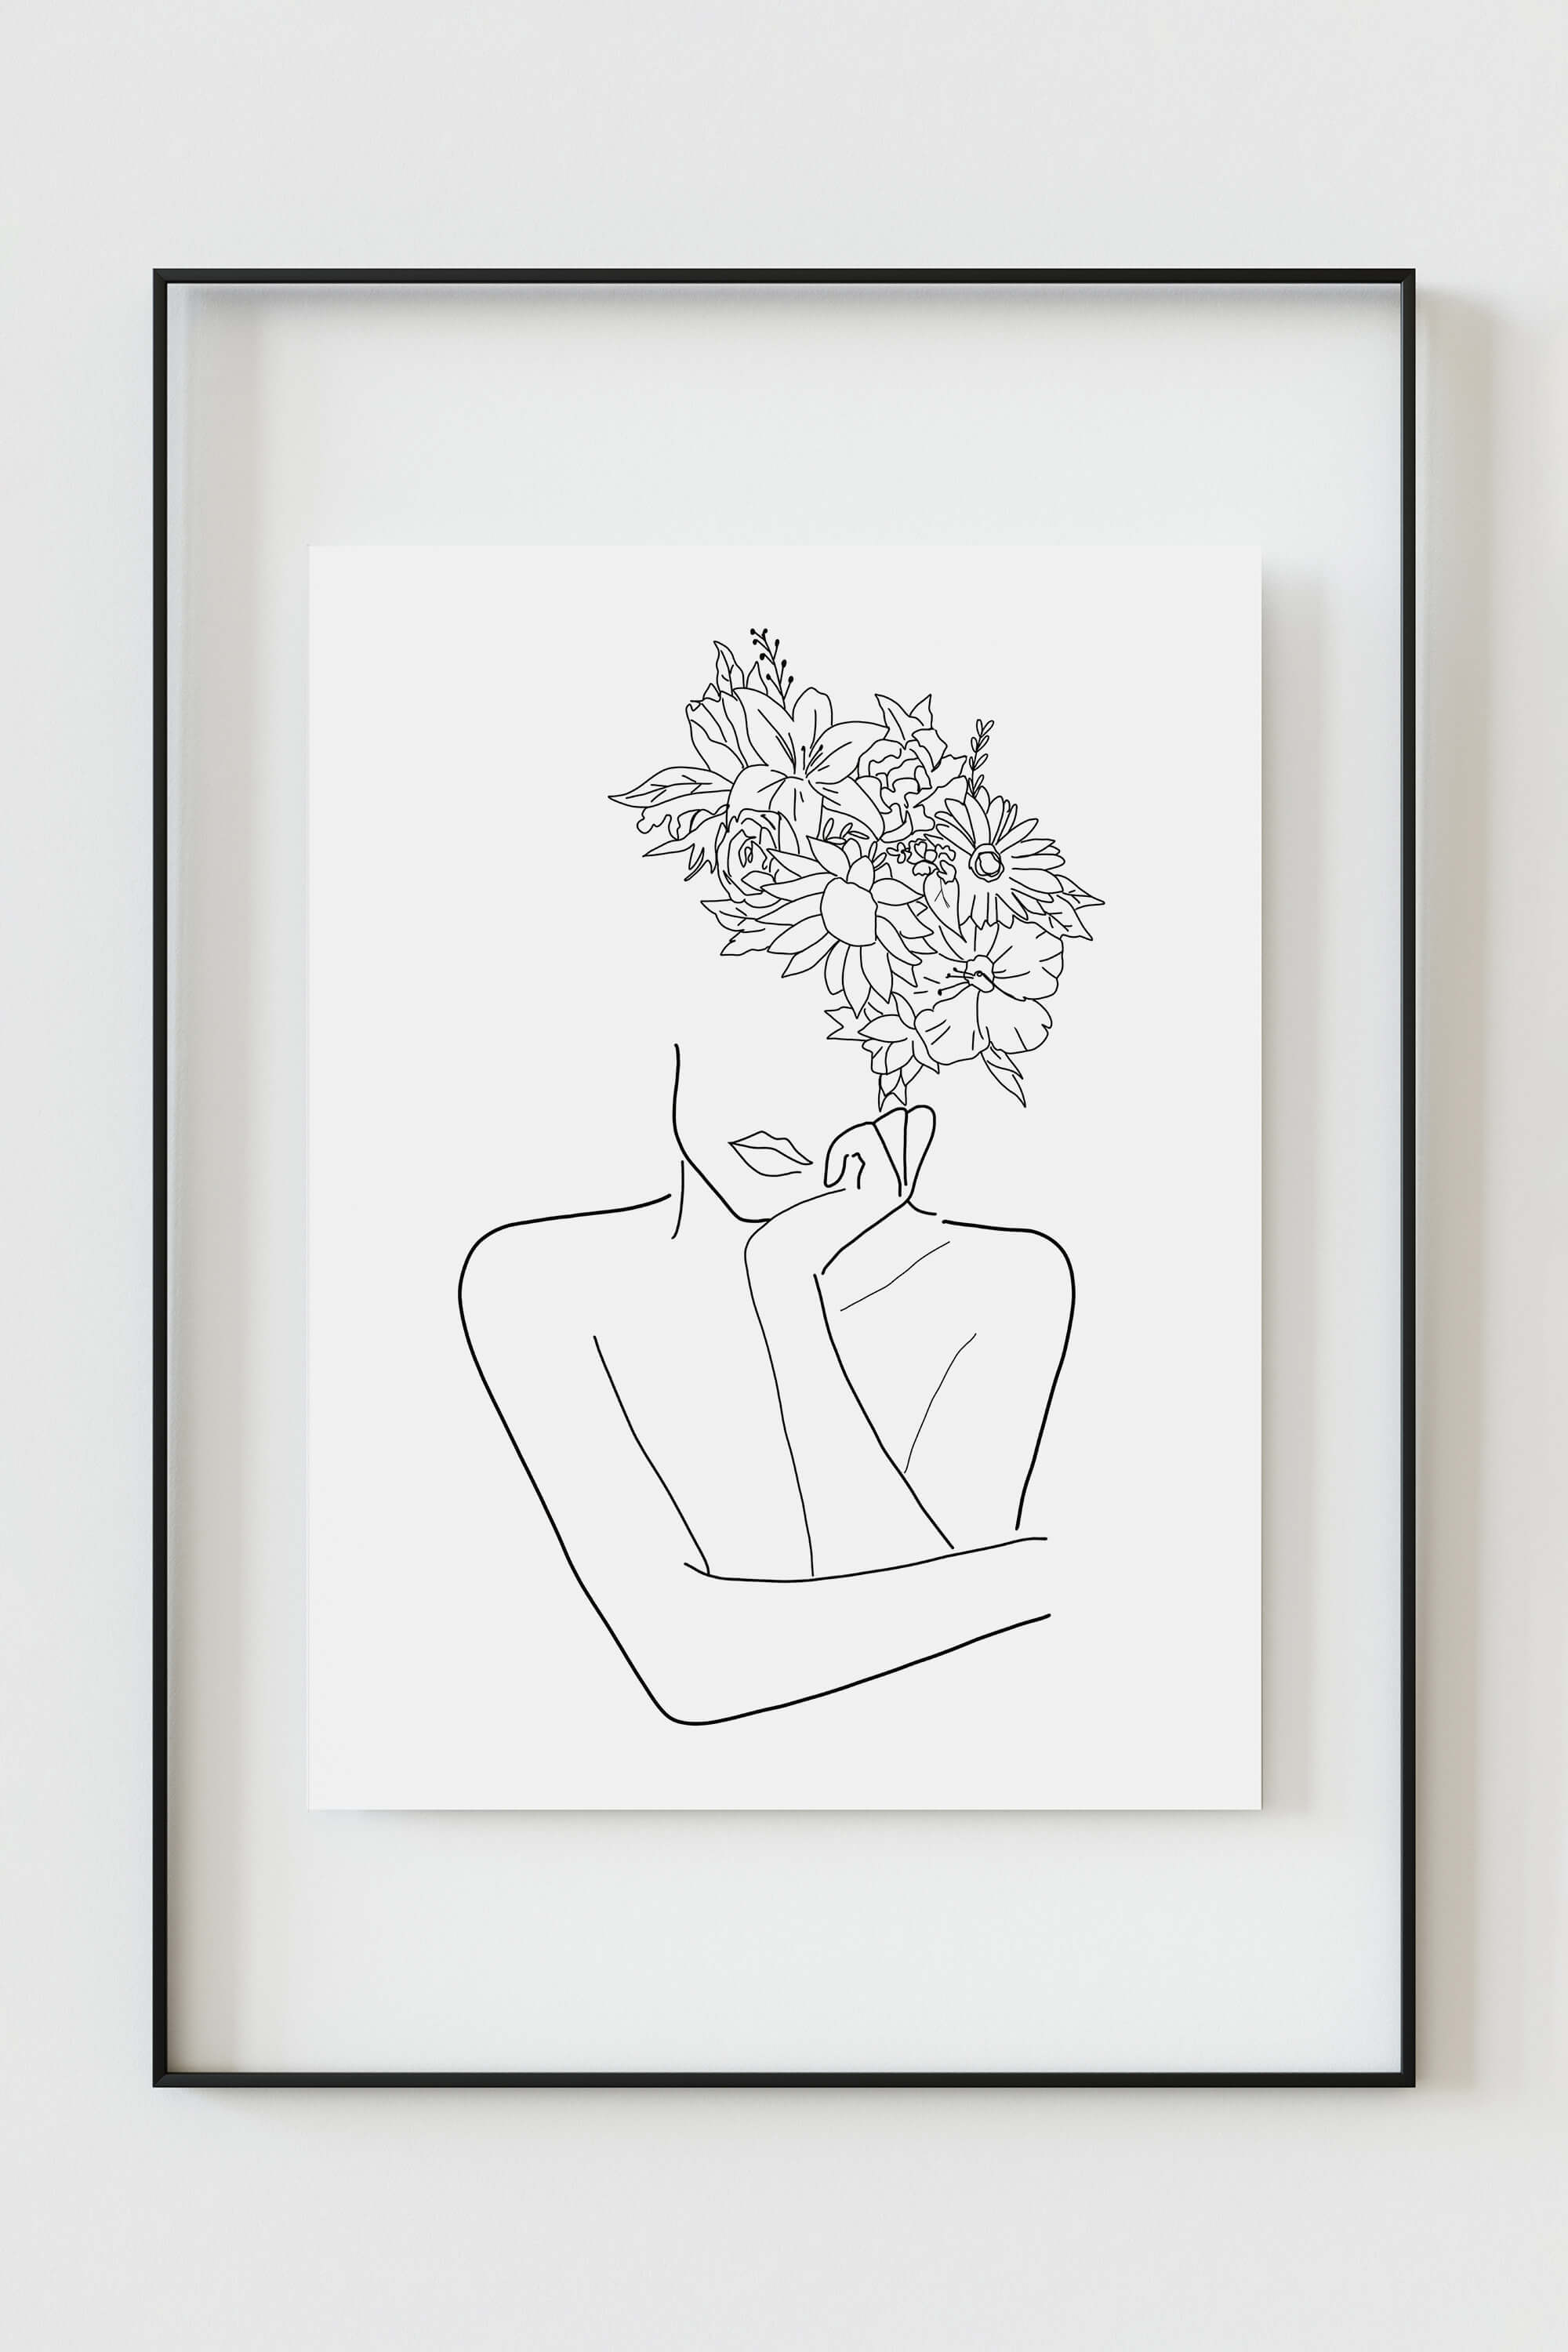 Detailed monochrome wall art capturing the essence of a thinking woman. The line drawing, with its exceptional craftsmanship, invites contemplation, making it an ideal addition for those seeking art with depth and intricacy.